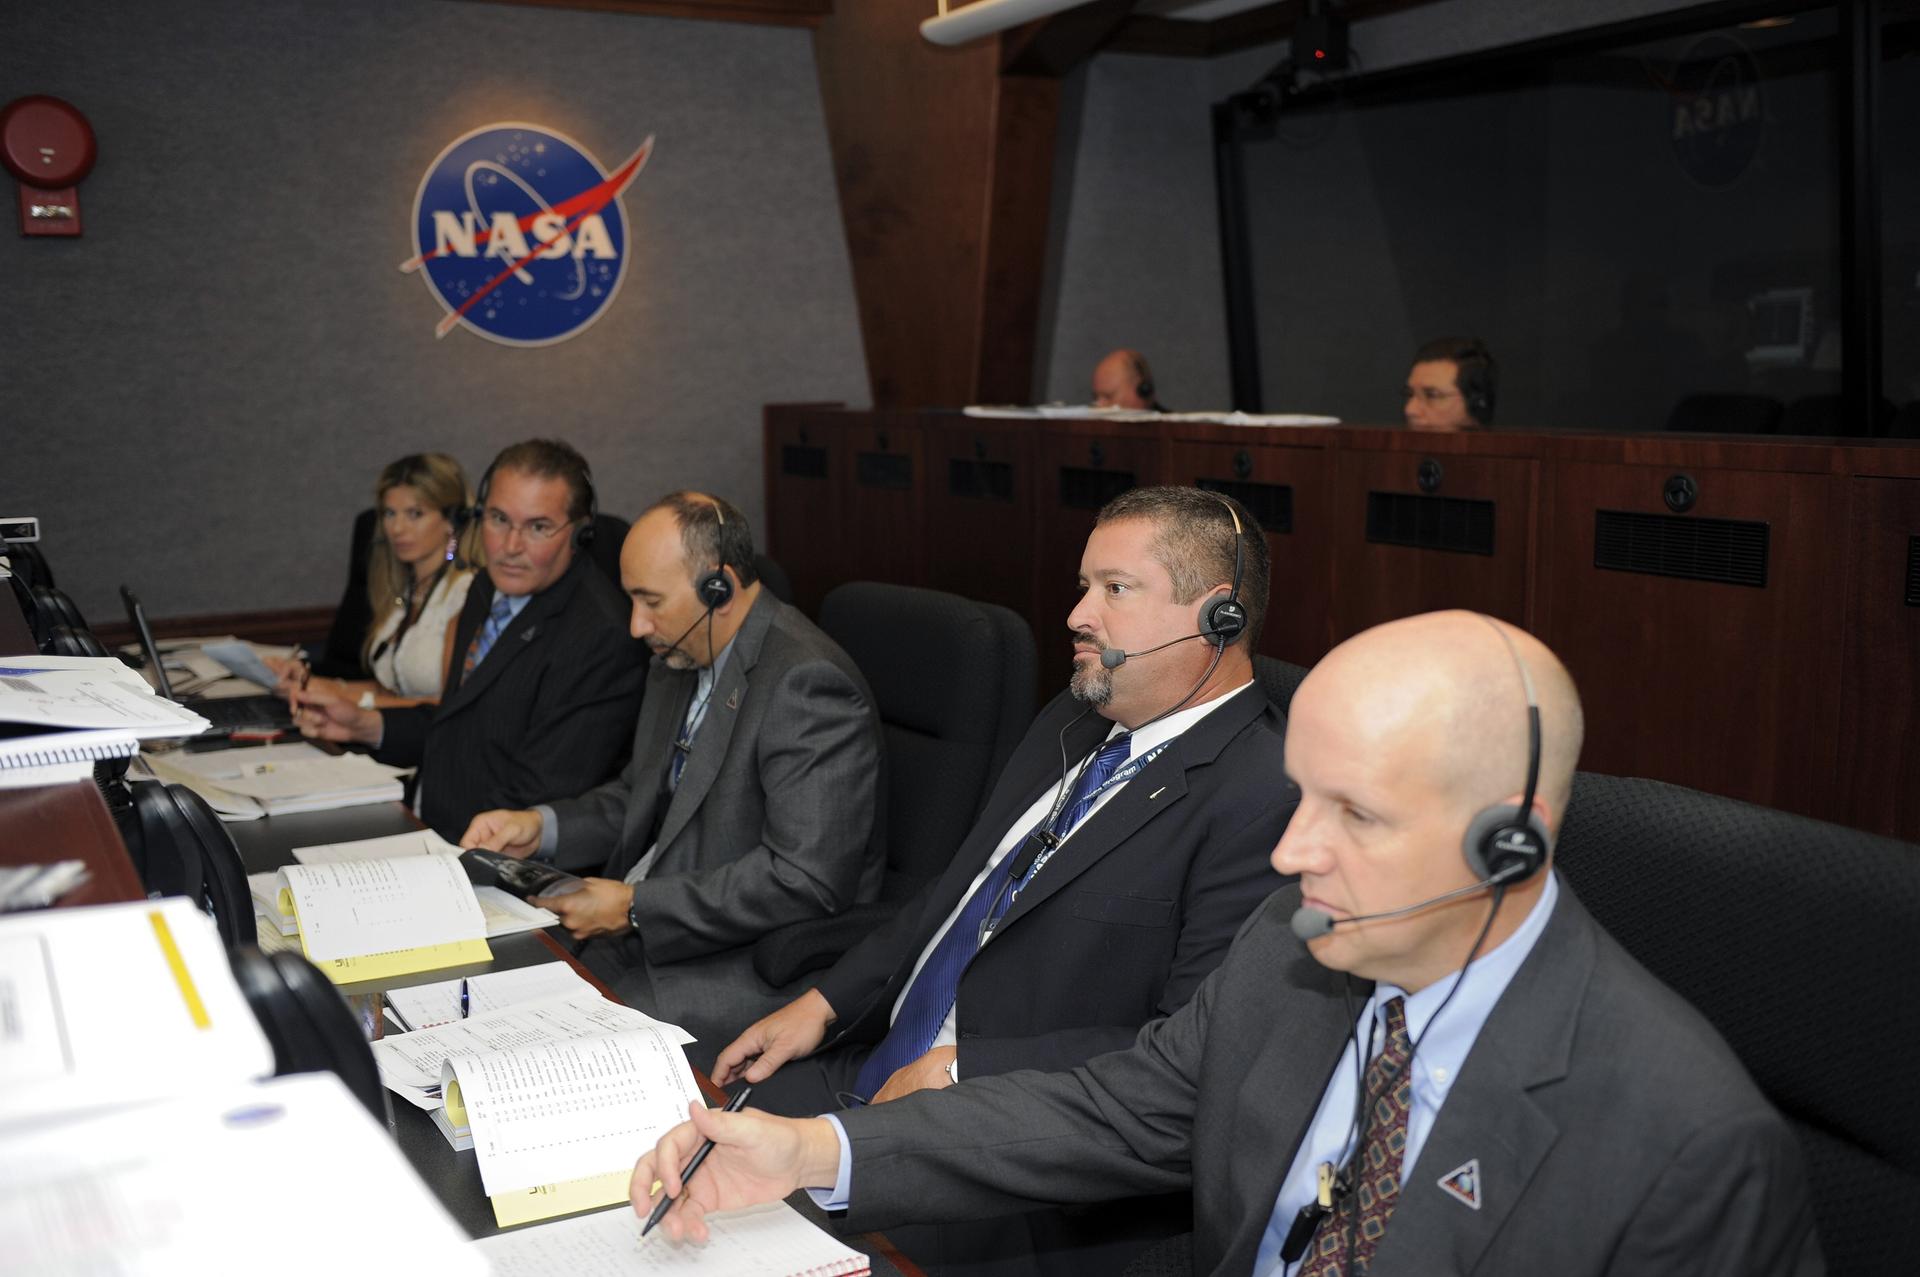 Omar Baez, second from right, GRAIL assistant launch director, Launch Services Program, monitors the launch countdown from the Mission Directors Center in Hangar AE on Cape Canaveral Air Force Station in Florida on Sept. 8, 2011.